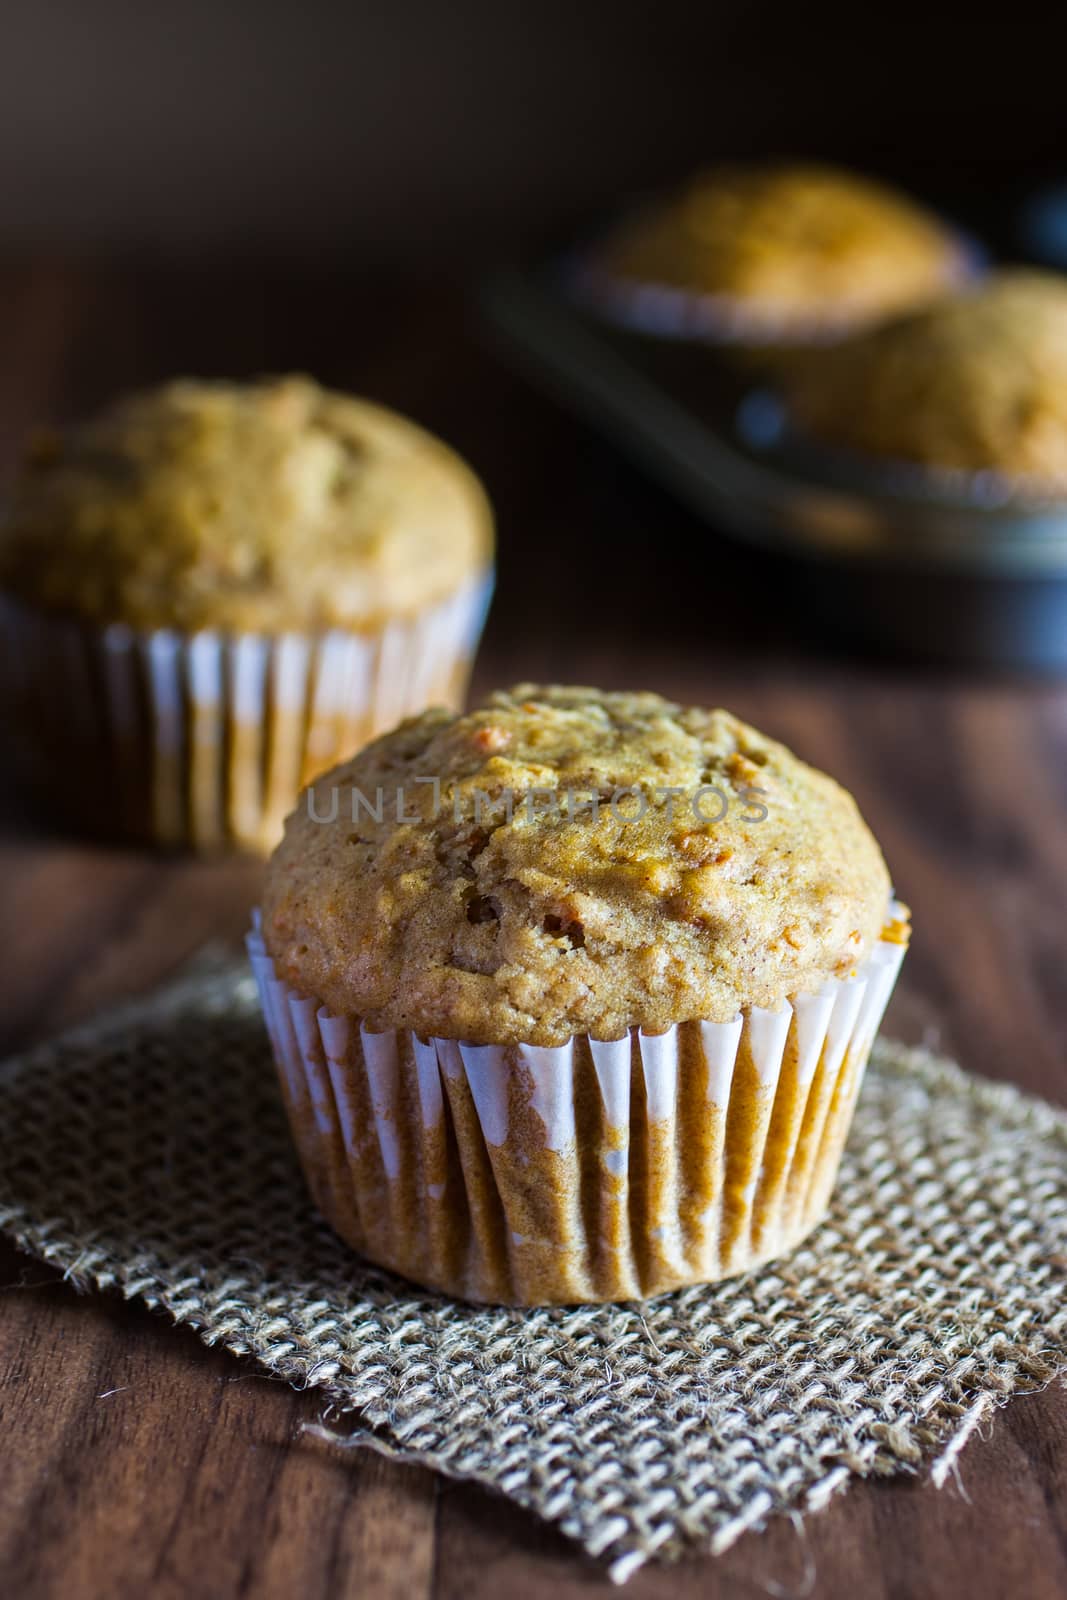 Applesauce Carrot Muffins by SouthernLightStudios